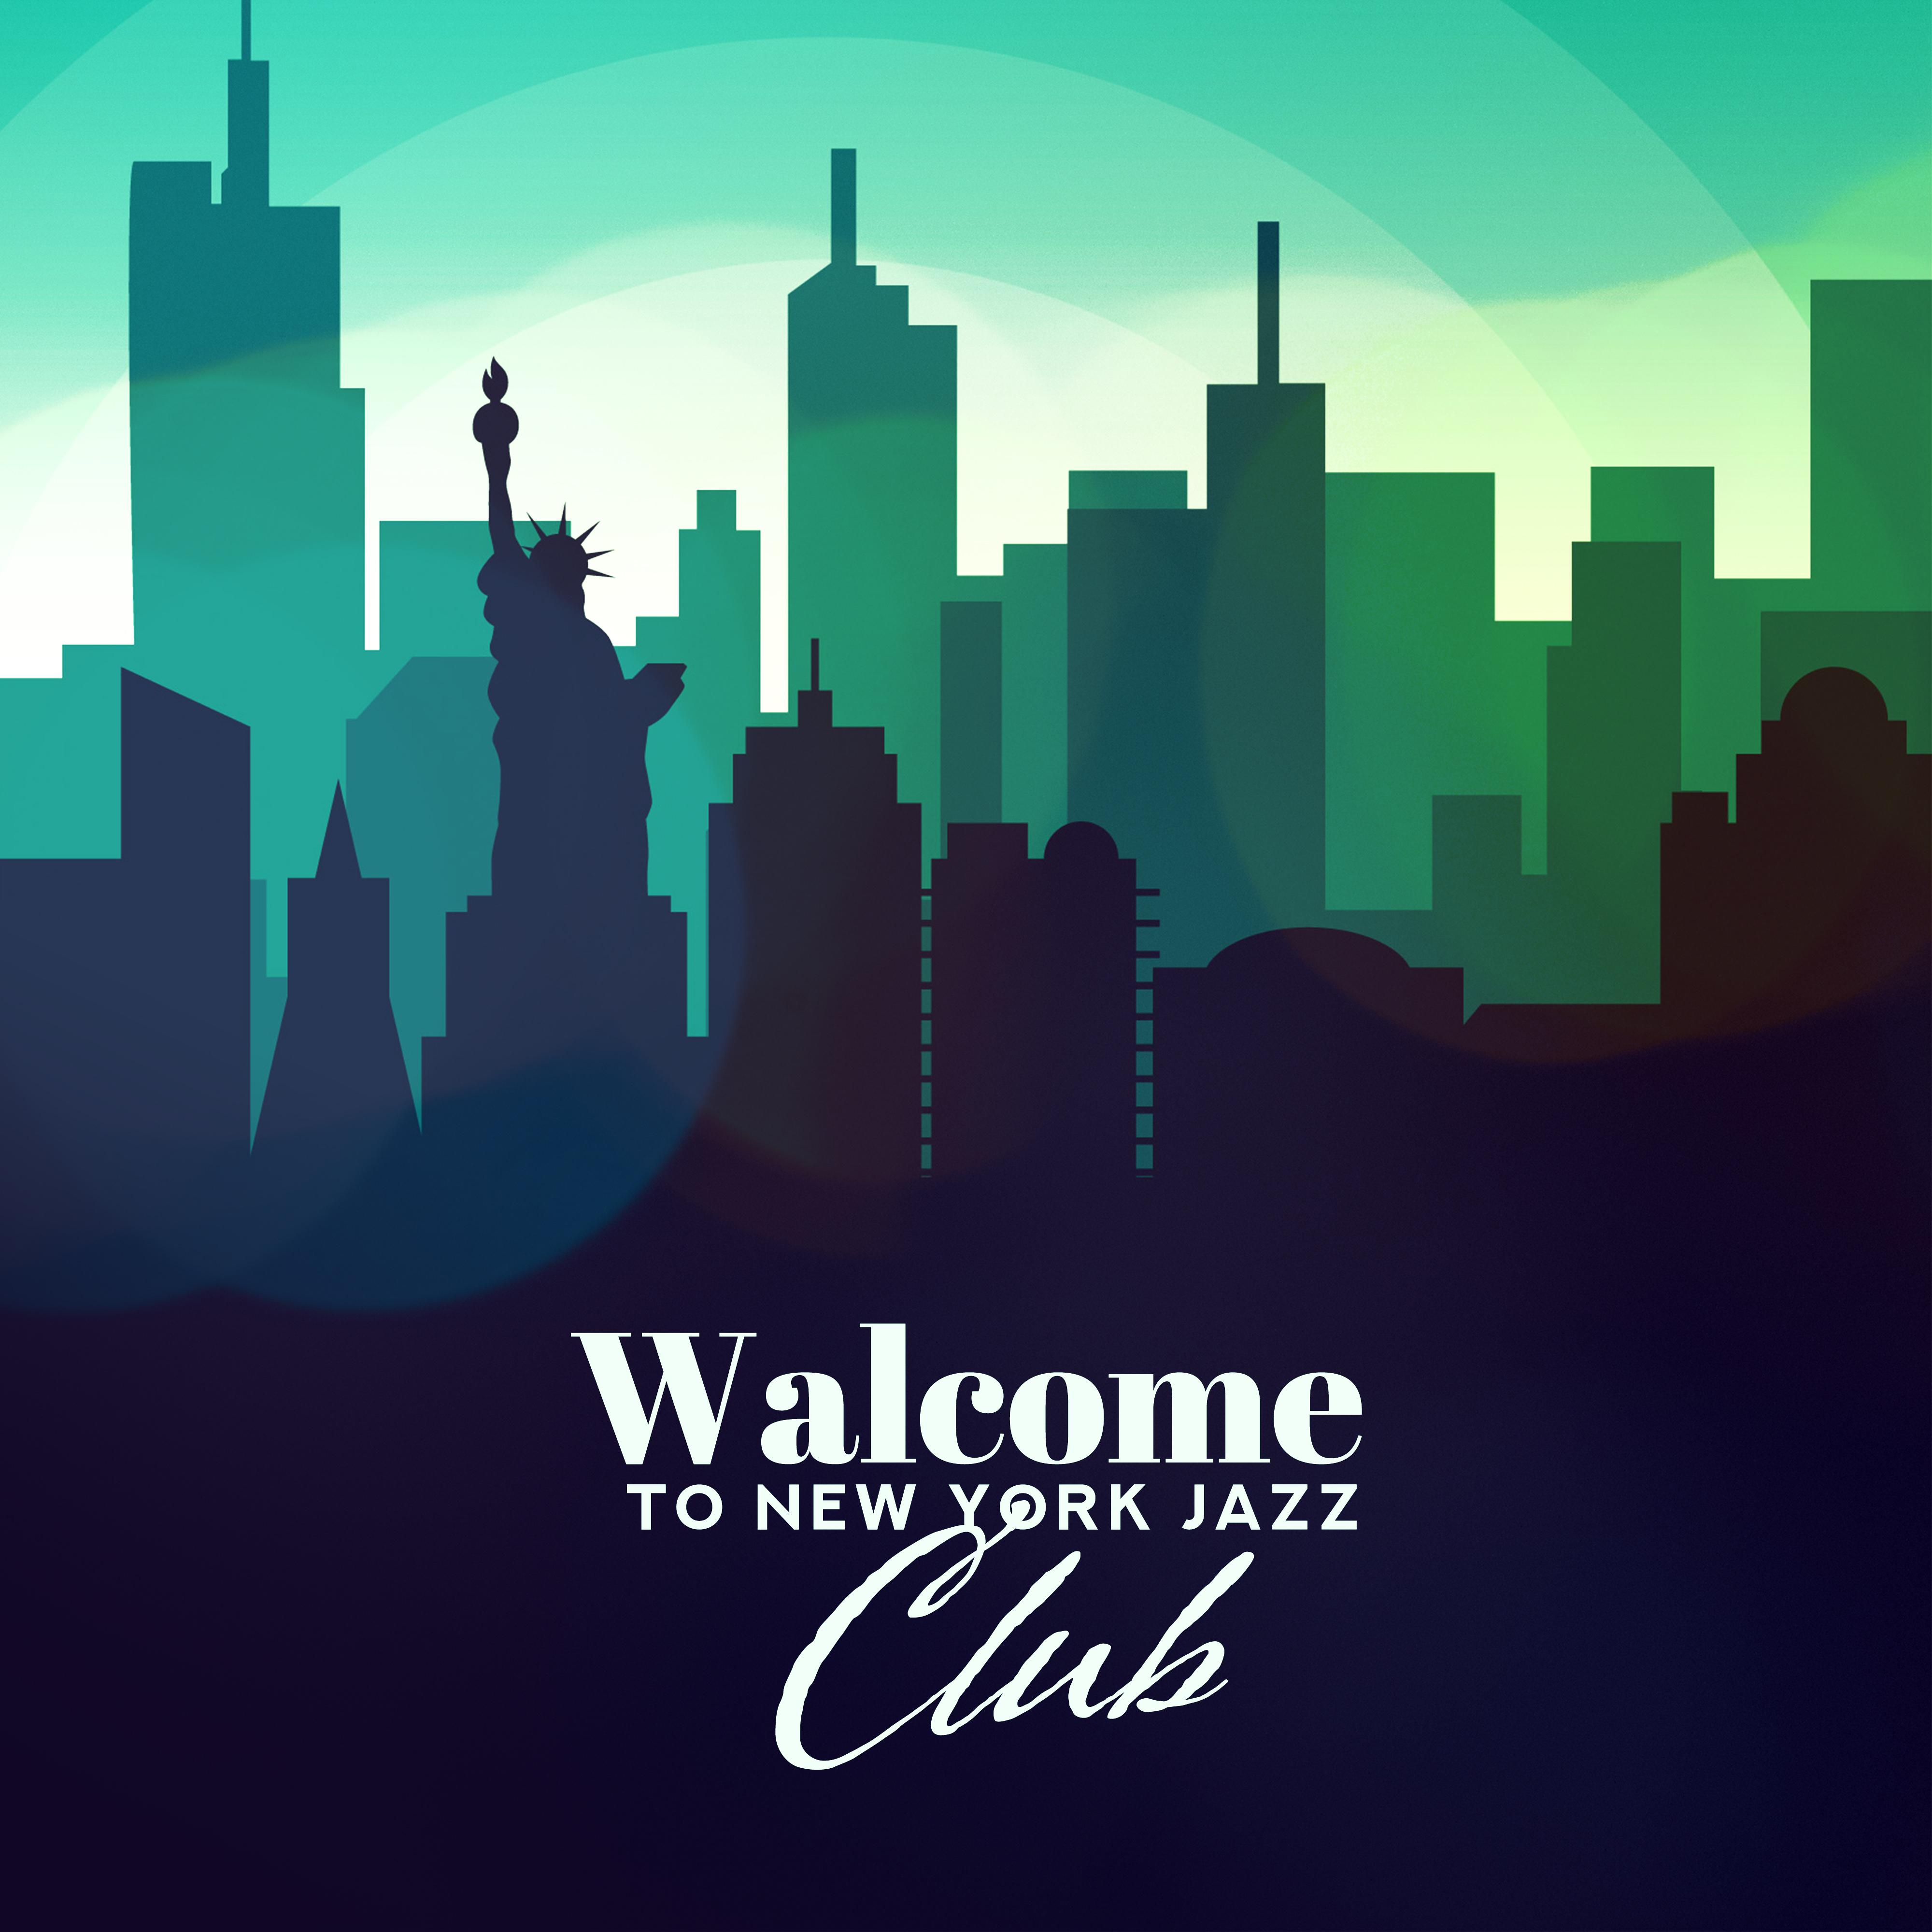 Walcome to New York Jazz Club: 2019 Instrumental Swing Jazz Music Compilation, Old School Dance Party Vibes, Best Vintage Melodies with Immortal Sounds of Piano, Sax, Contrabass & Many More